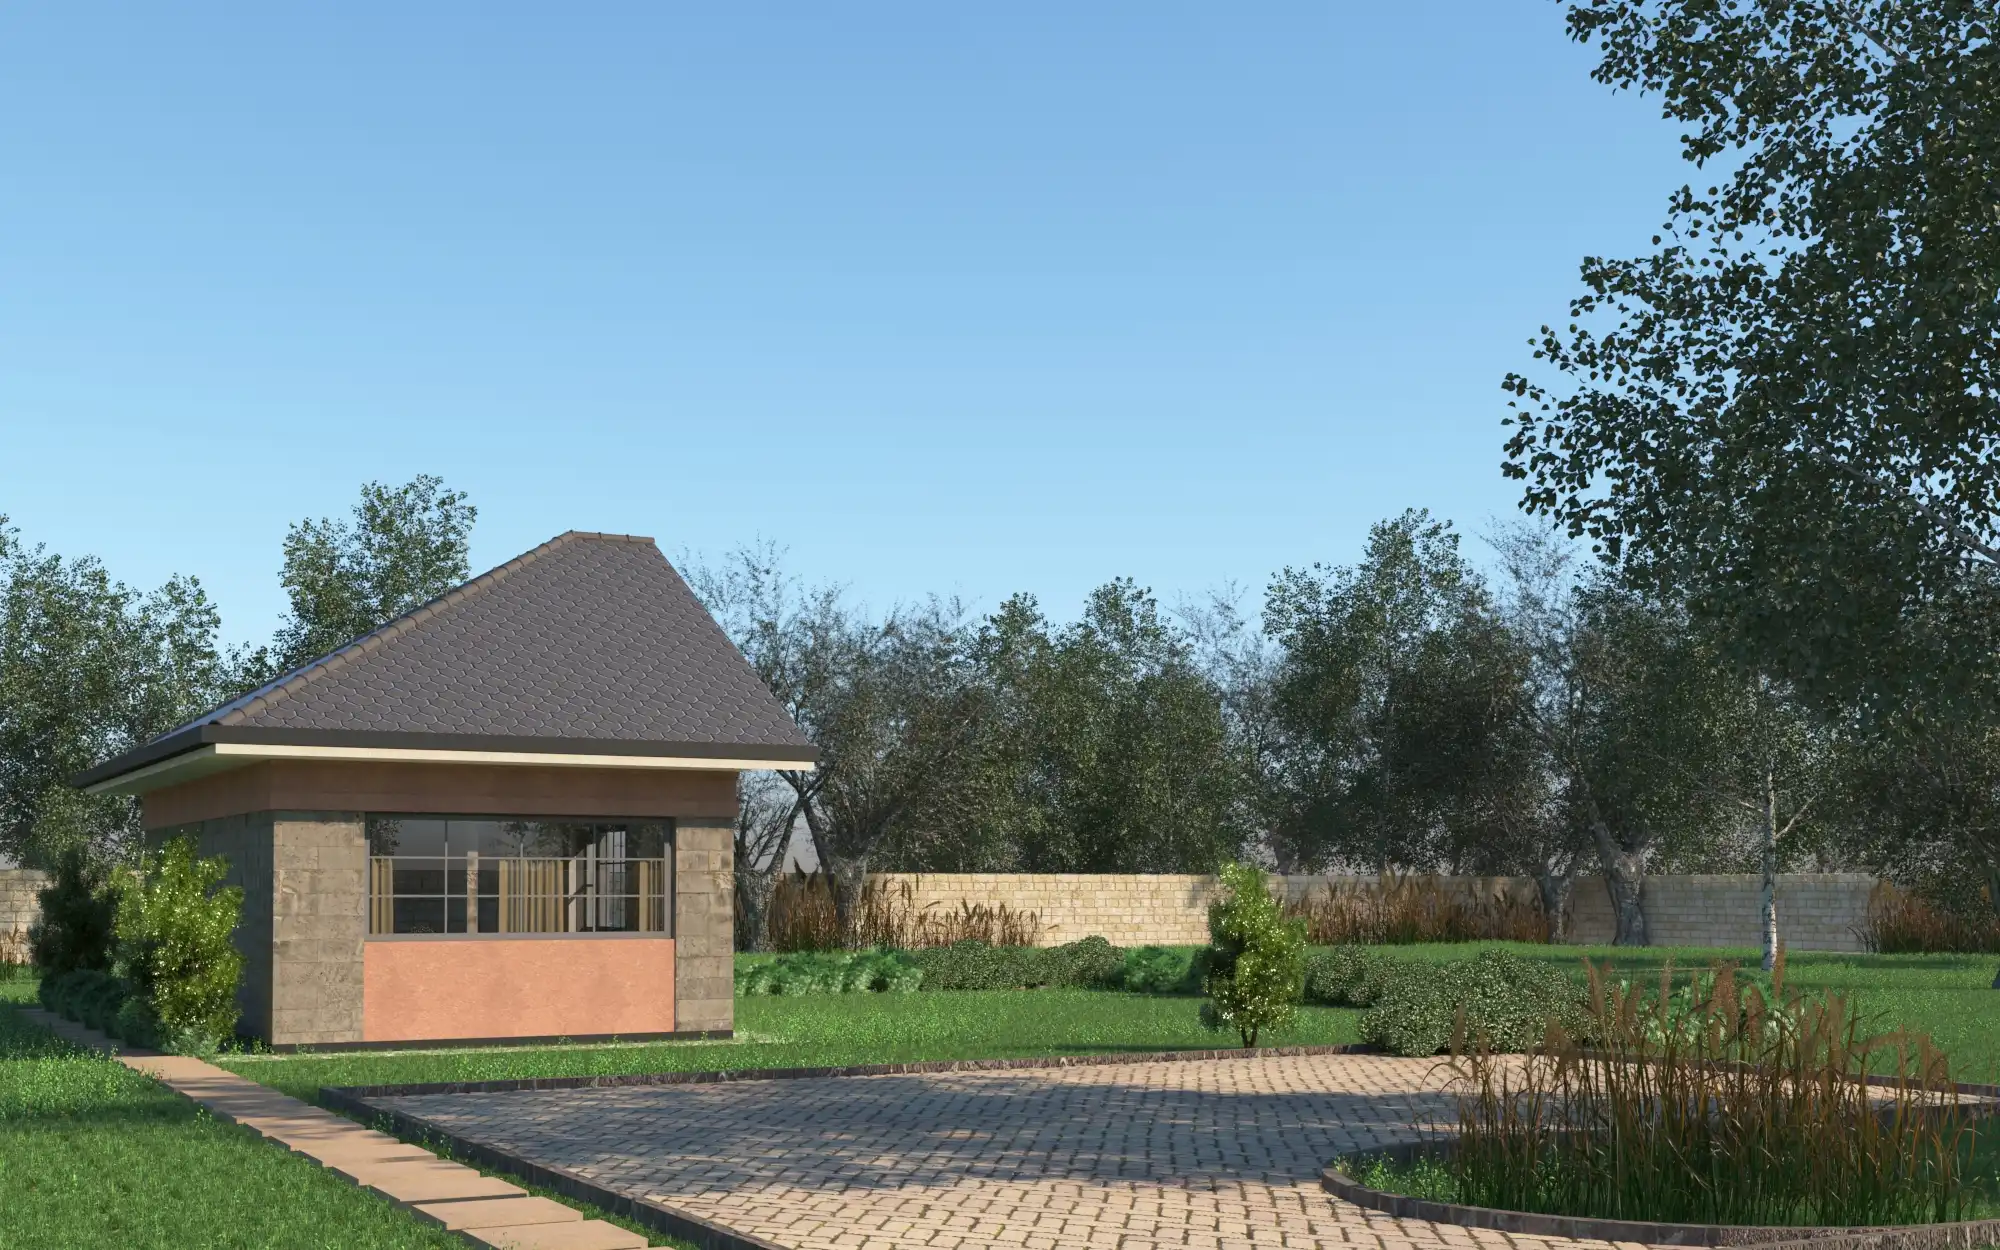 4 Bedroom Jenga Pole Pole Bungalow - ID 4171 - Phase 1 Front from Inuua Tujenge house plans with 4 bedrooms and 2 bathrooms. ( jengapolepole )